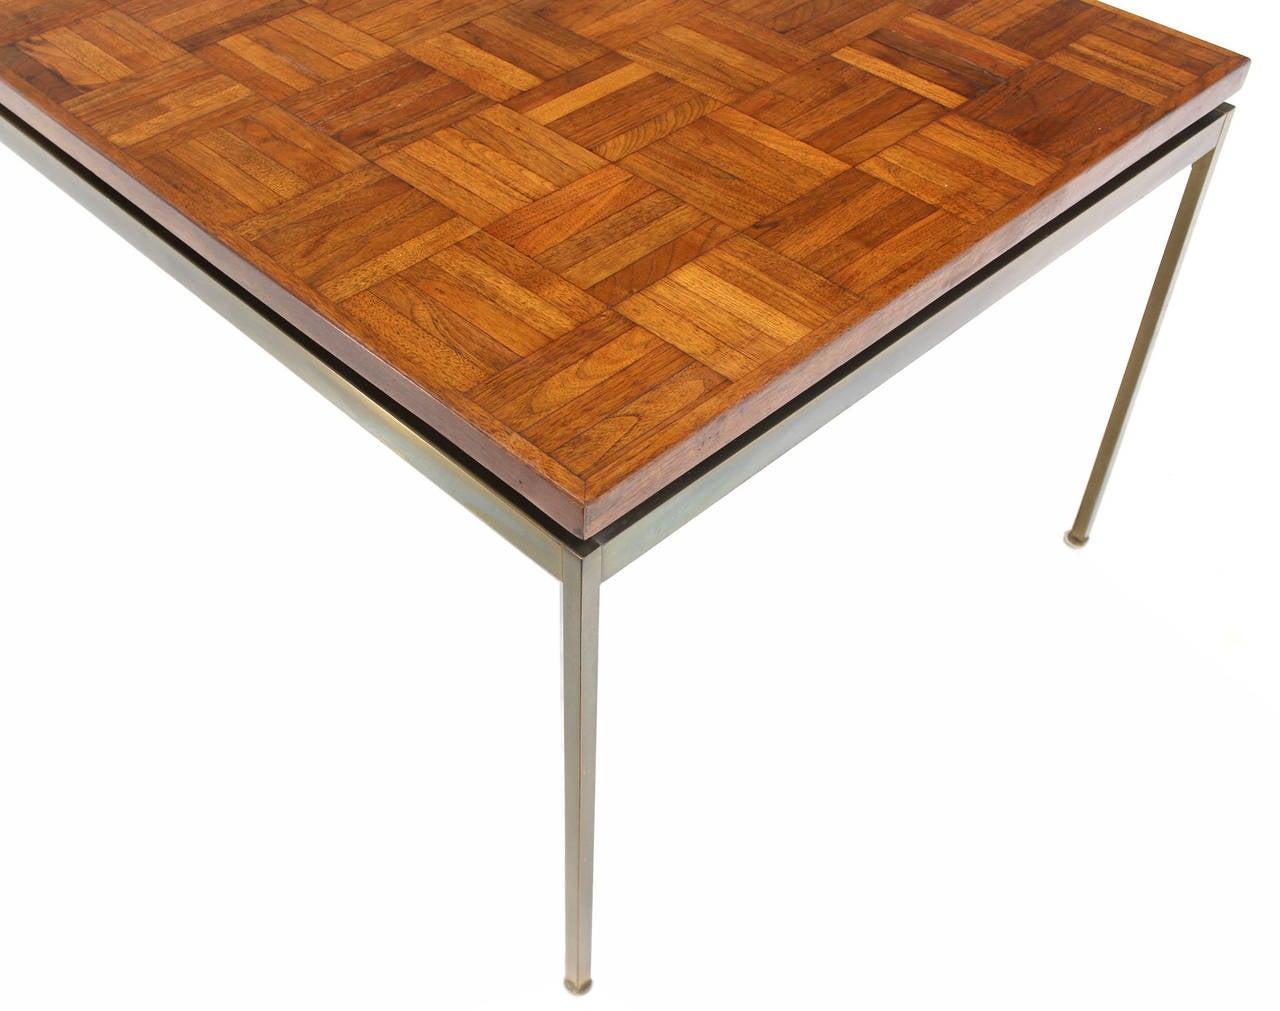 Mid Century Modern Large Rectangle Brass Base Parquet Top Coffee Table MINT! (Lackiert) im Angebot